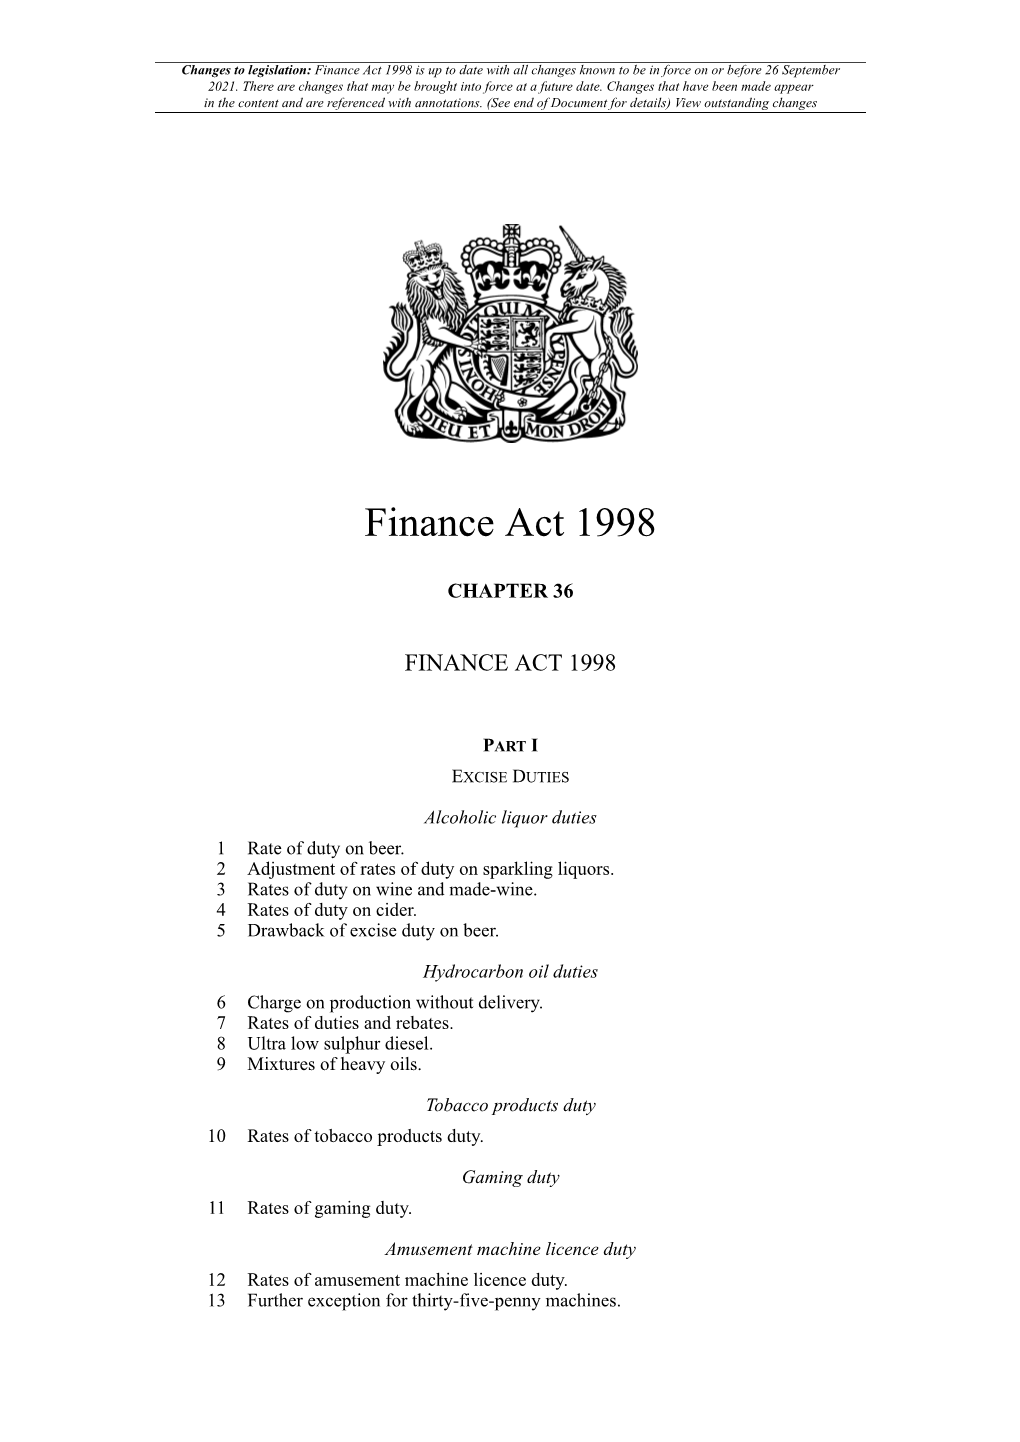 Finance Act 1998 Is up to Date with All Changes Known to Be in Force on Or Before 26 September 2021